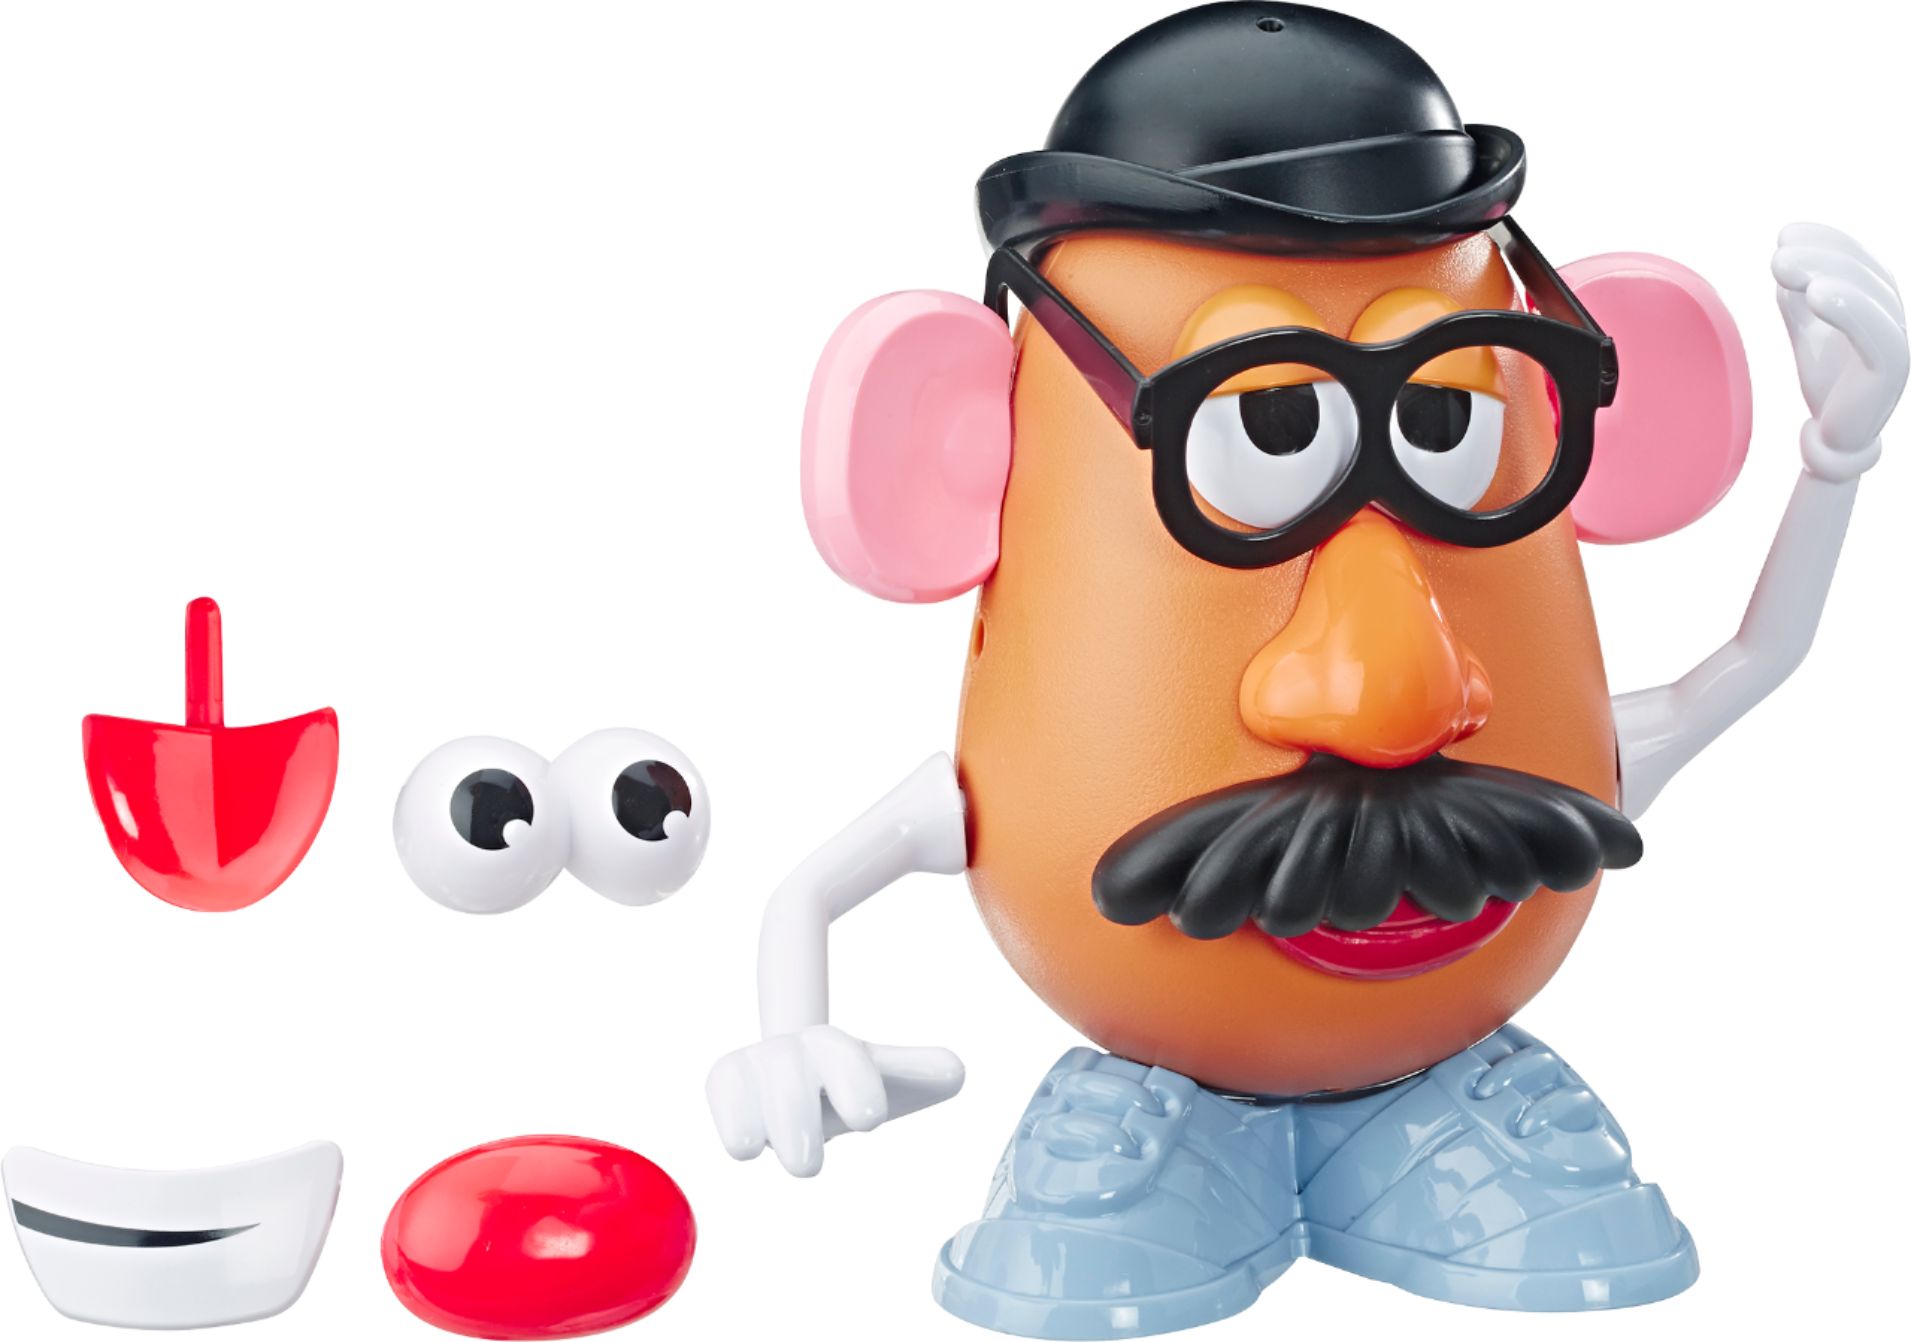 Playskool Mrs. Potato Head or Mr. Potato Head parts case, toys for children  from 2 years, (Random Color)